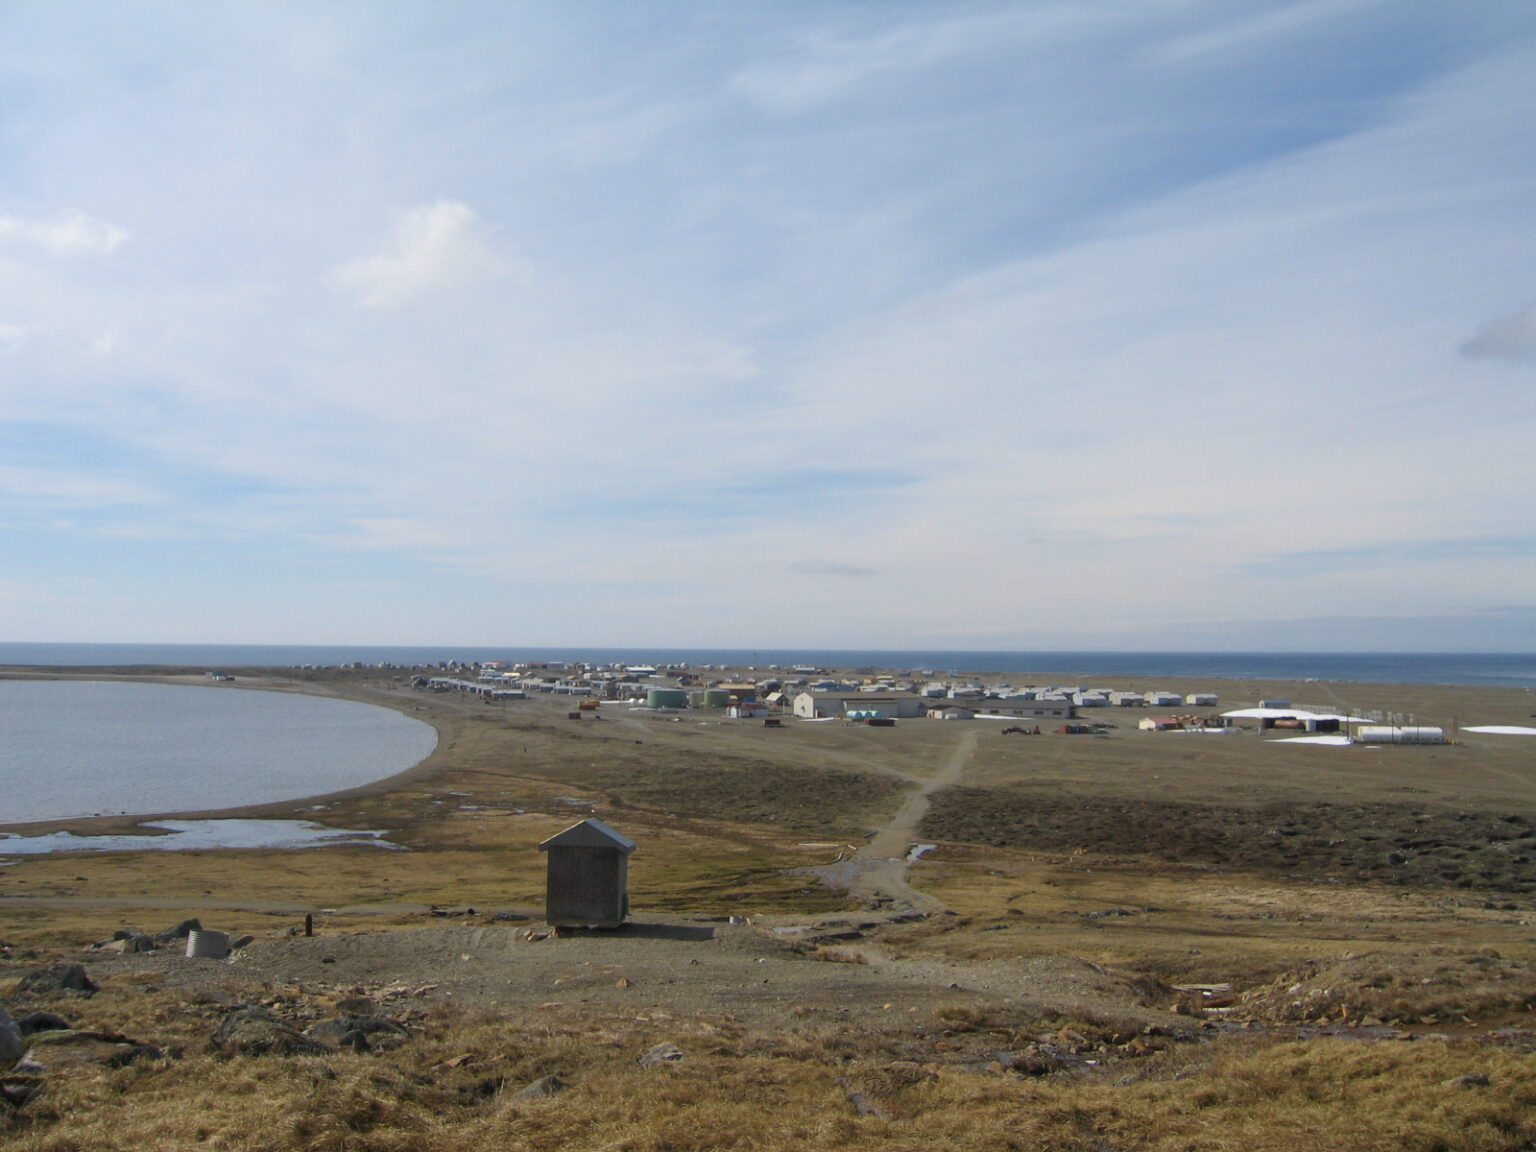 A hillside view of Gambell, one of the two communities on St. Lawrence Island in the northern Bering Sea, is seen in 2005. Two Indigenous men sailed from Russia's Chuktoka region, arriving in Gambell in early October. Upon arrival, they asked for asylum. (Photo provided by the Alaska Division of Community and Regional Affairs)